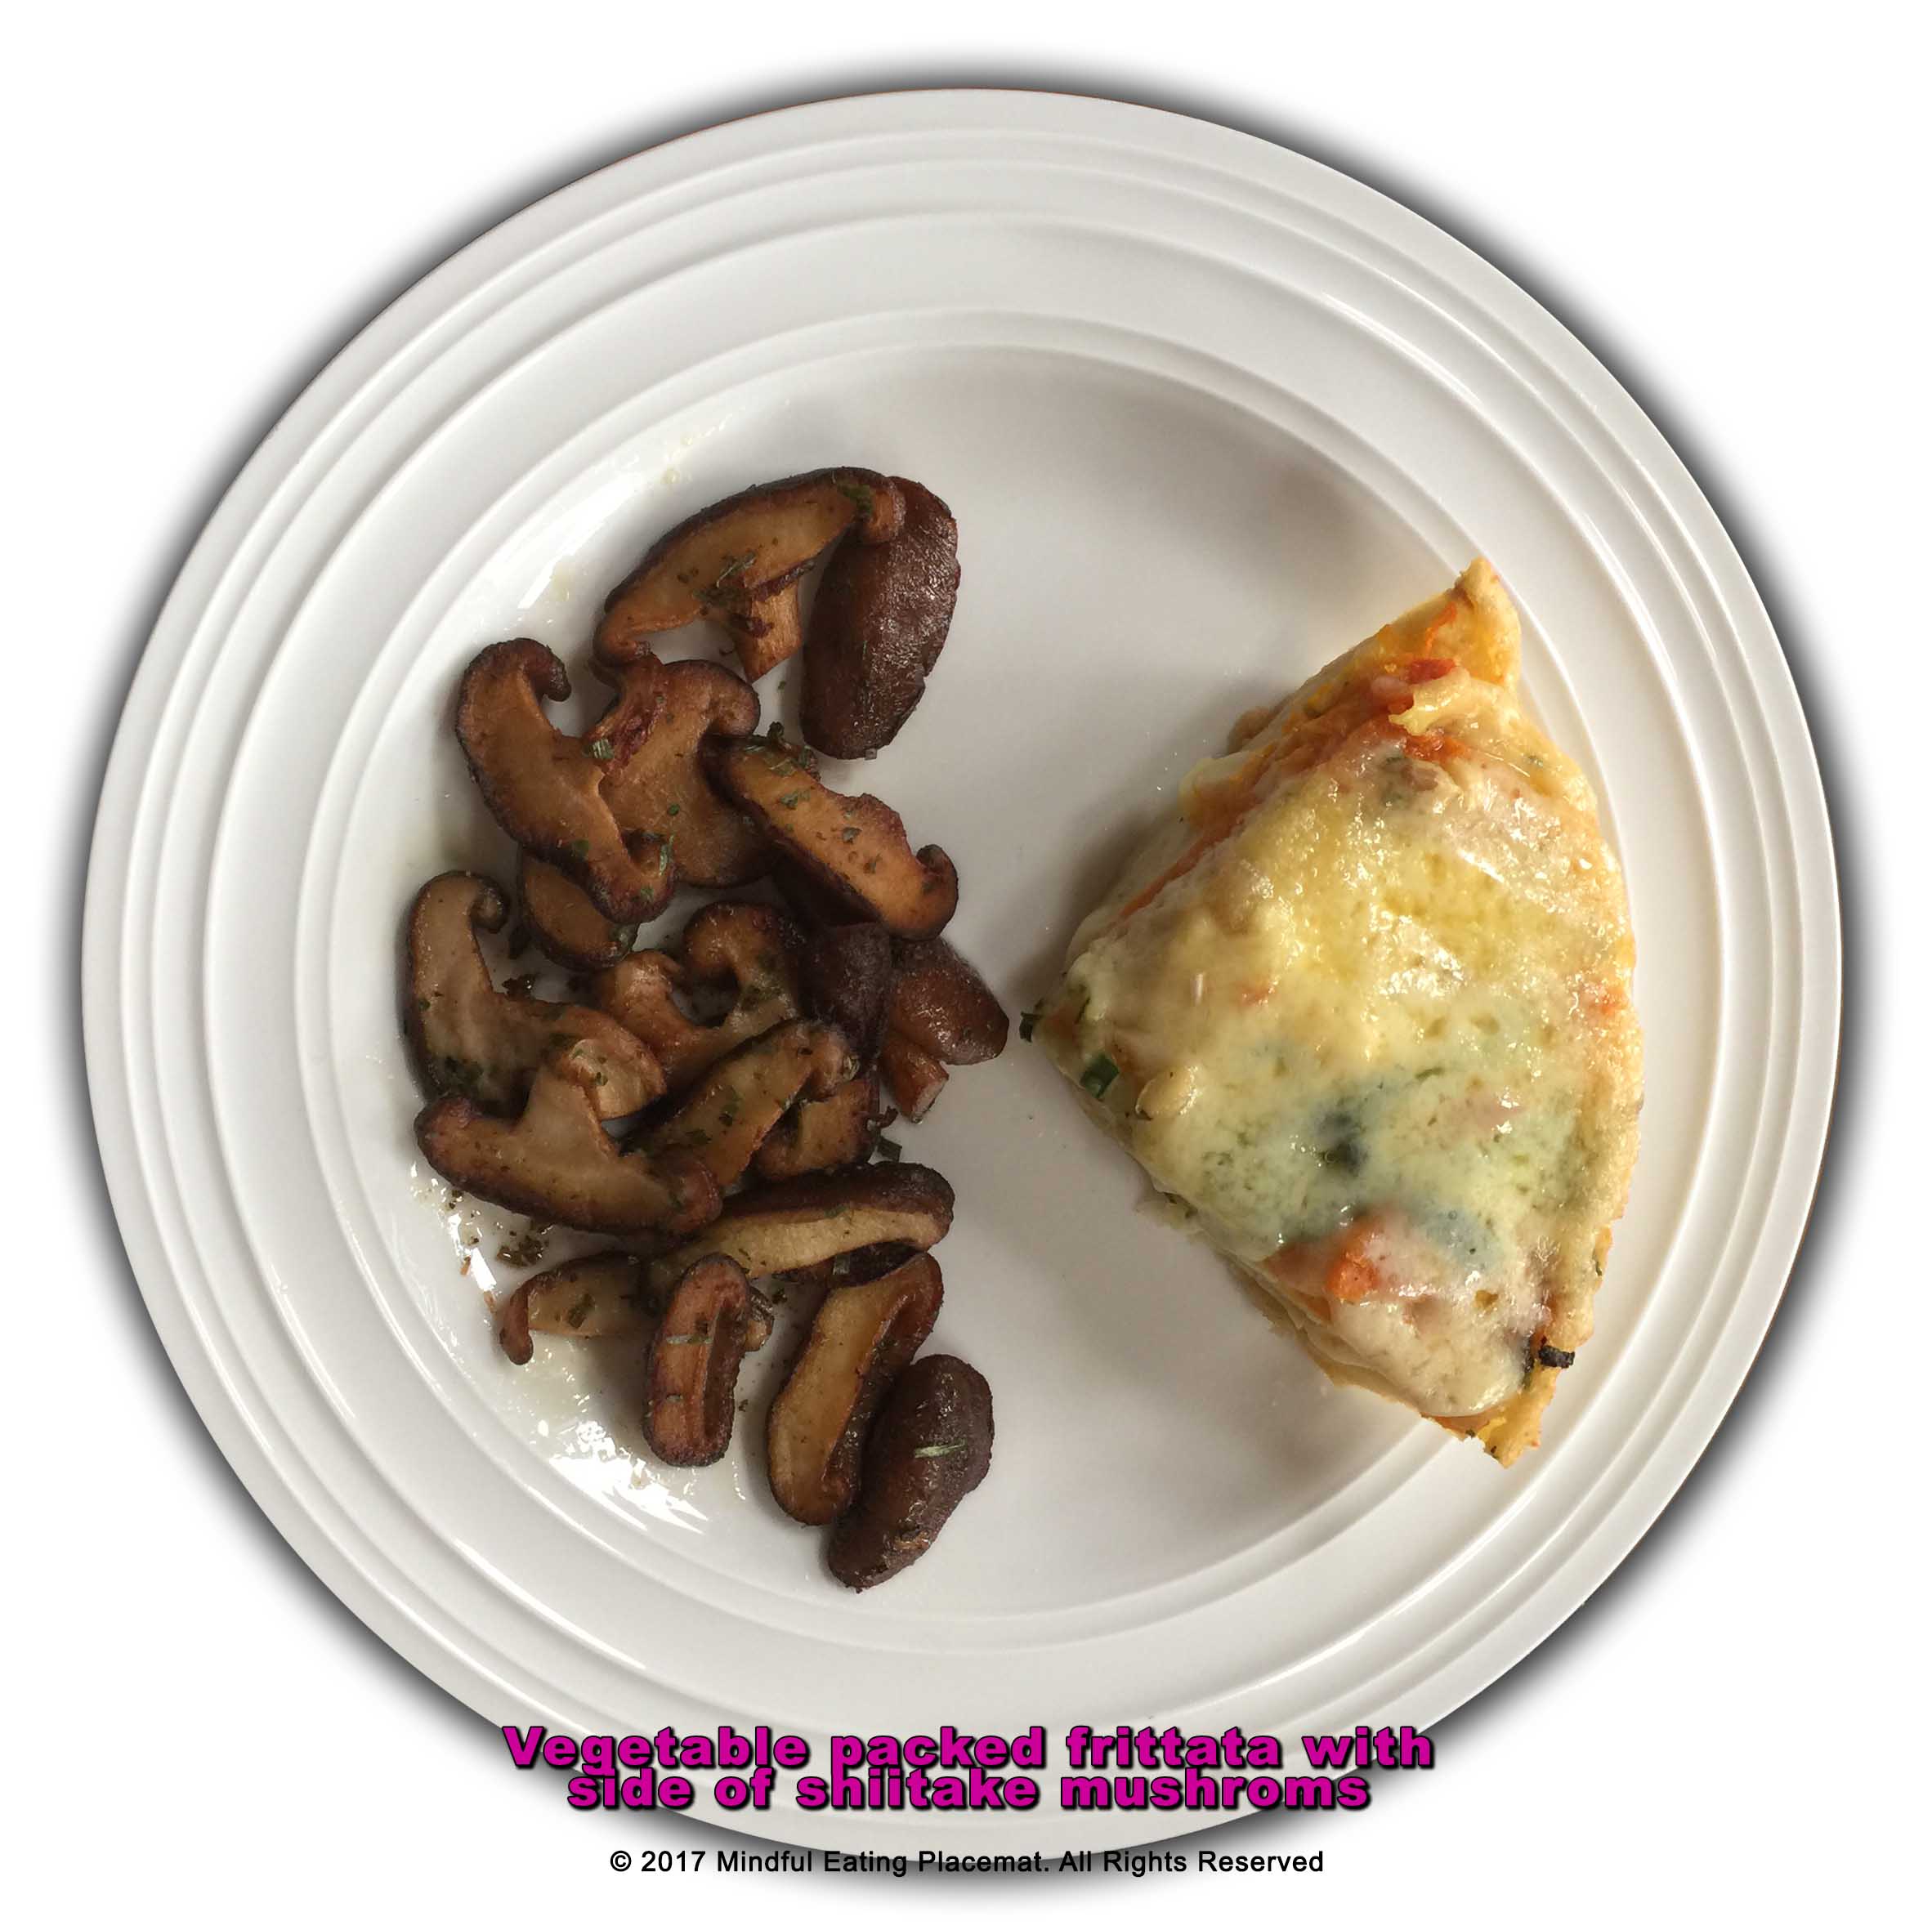 Vegetable packed frittata with a side of shiitake